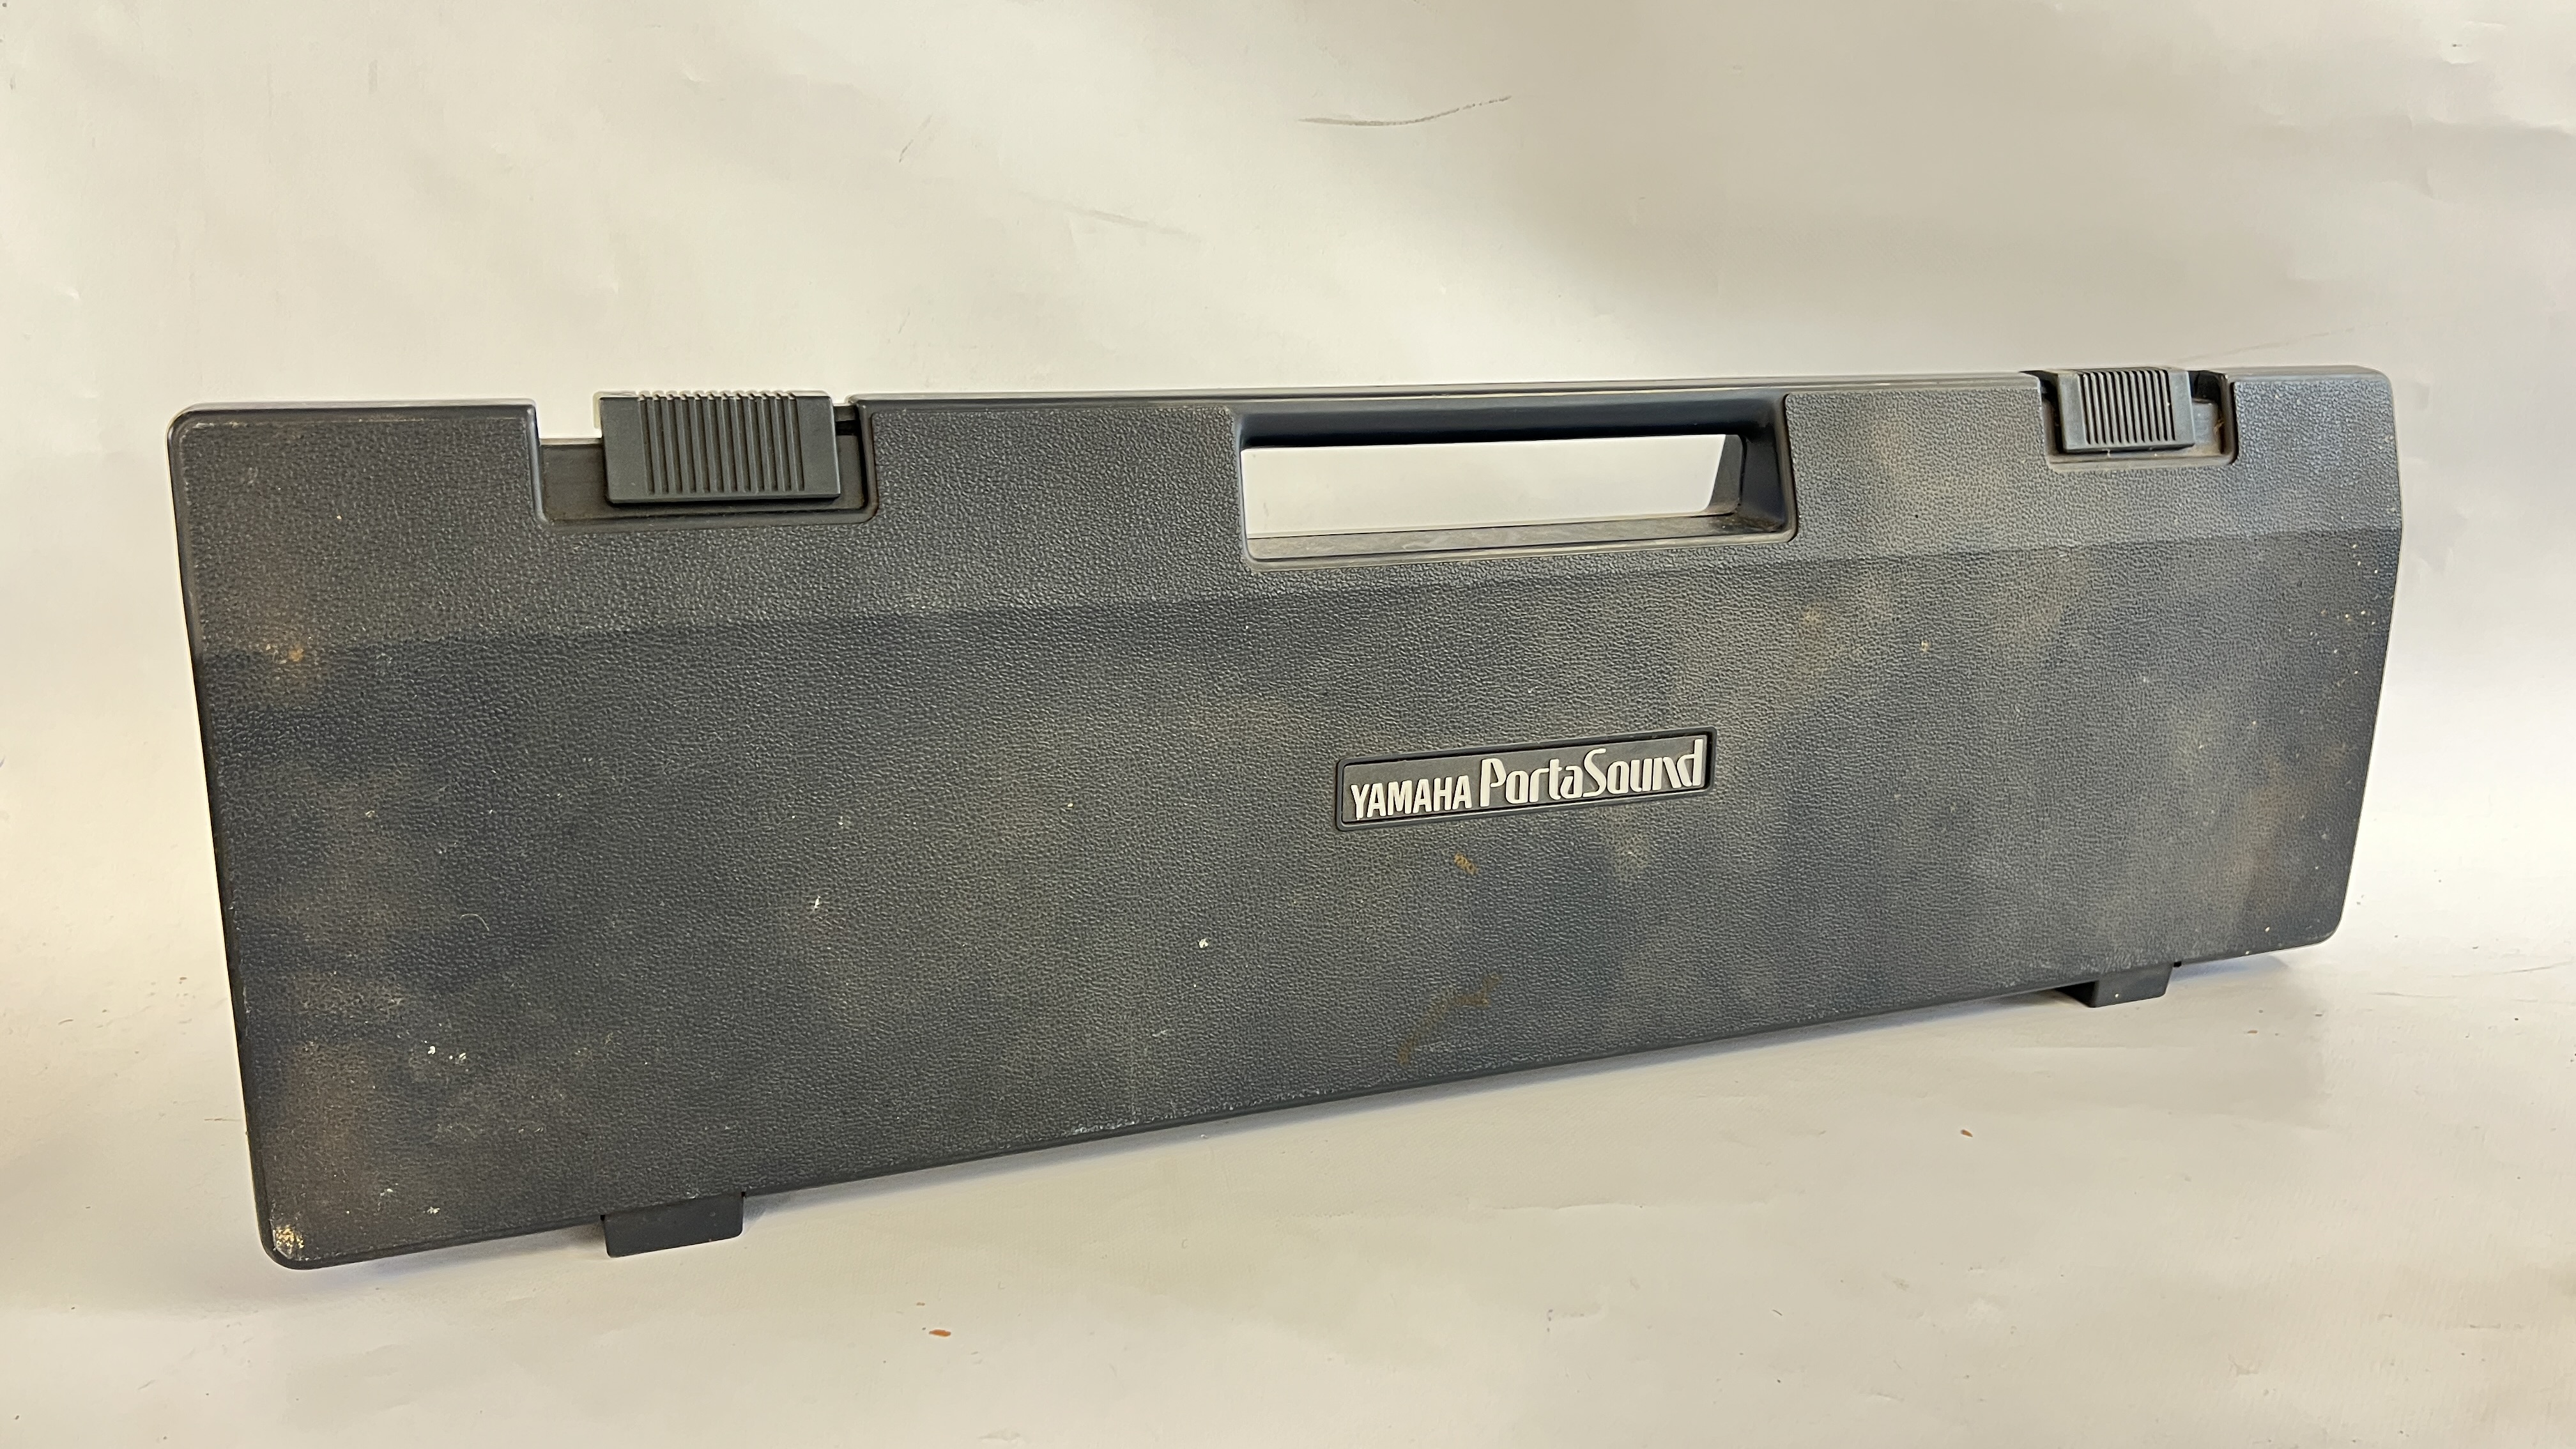 YAMAHA PORTASOUND MP-1 IN CARRY CASE, NO POWER ADAPTOR - SOLD AS SEEN - AS CLEARED. - Image 6 of 6